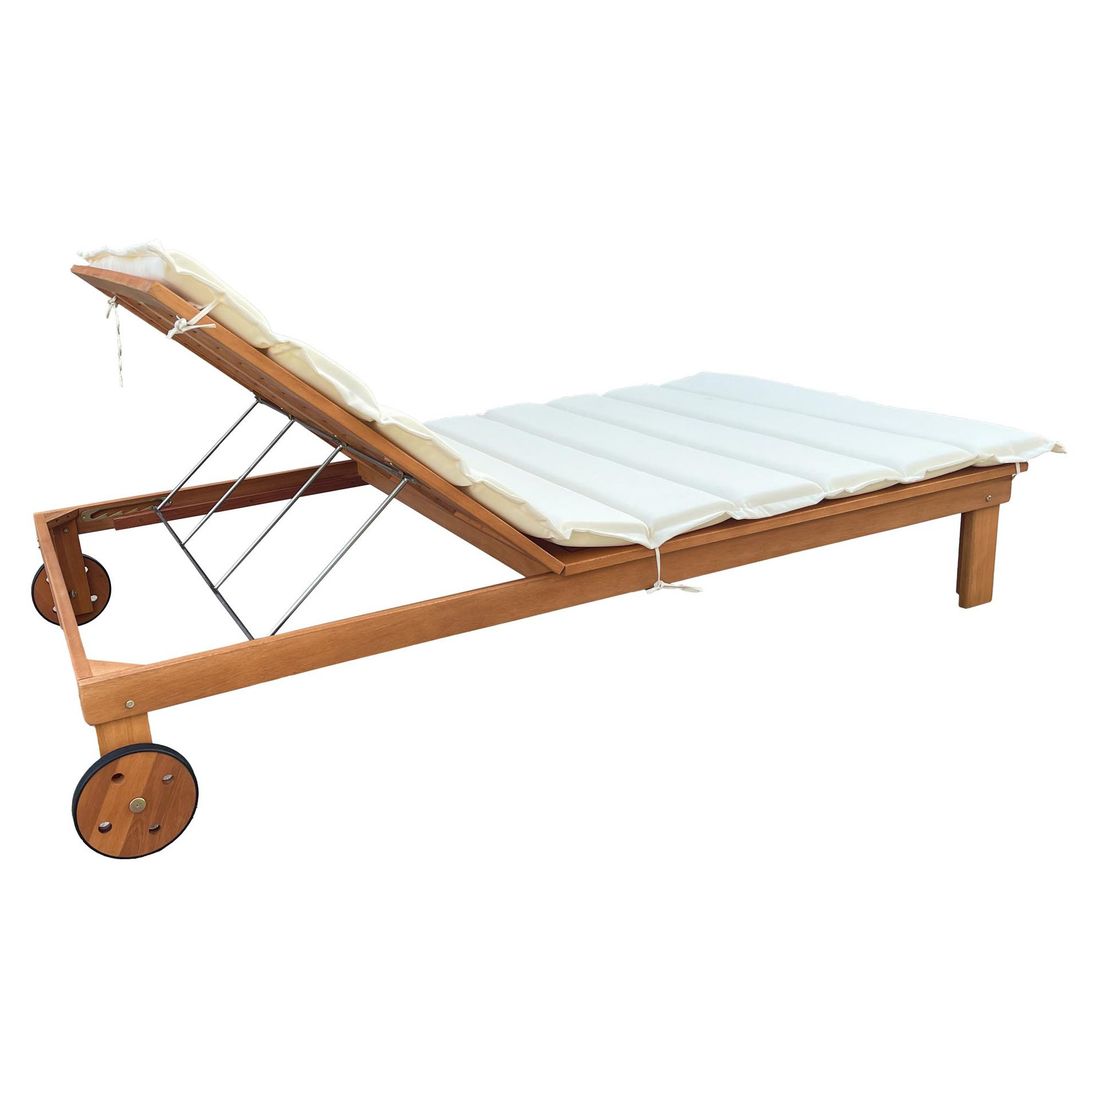 OUTLIV. Columbia Daybed 200x120cm Eukalytpus